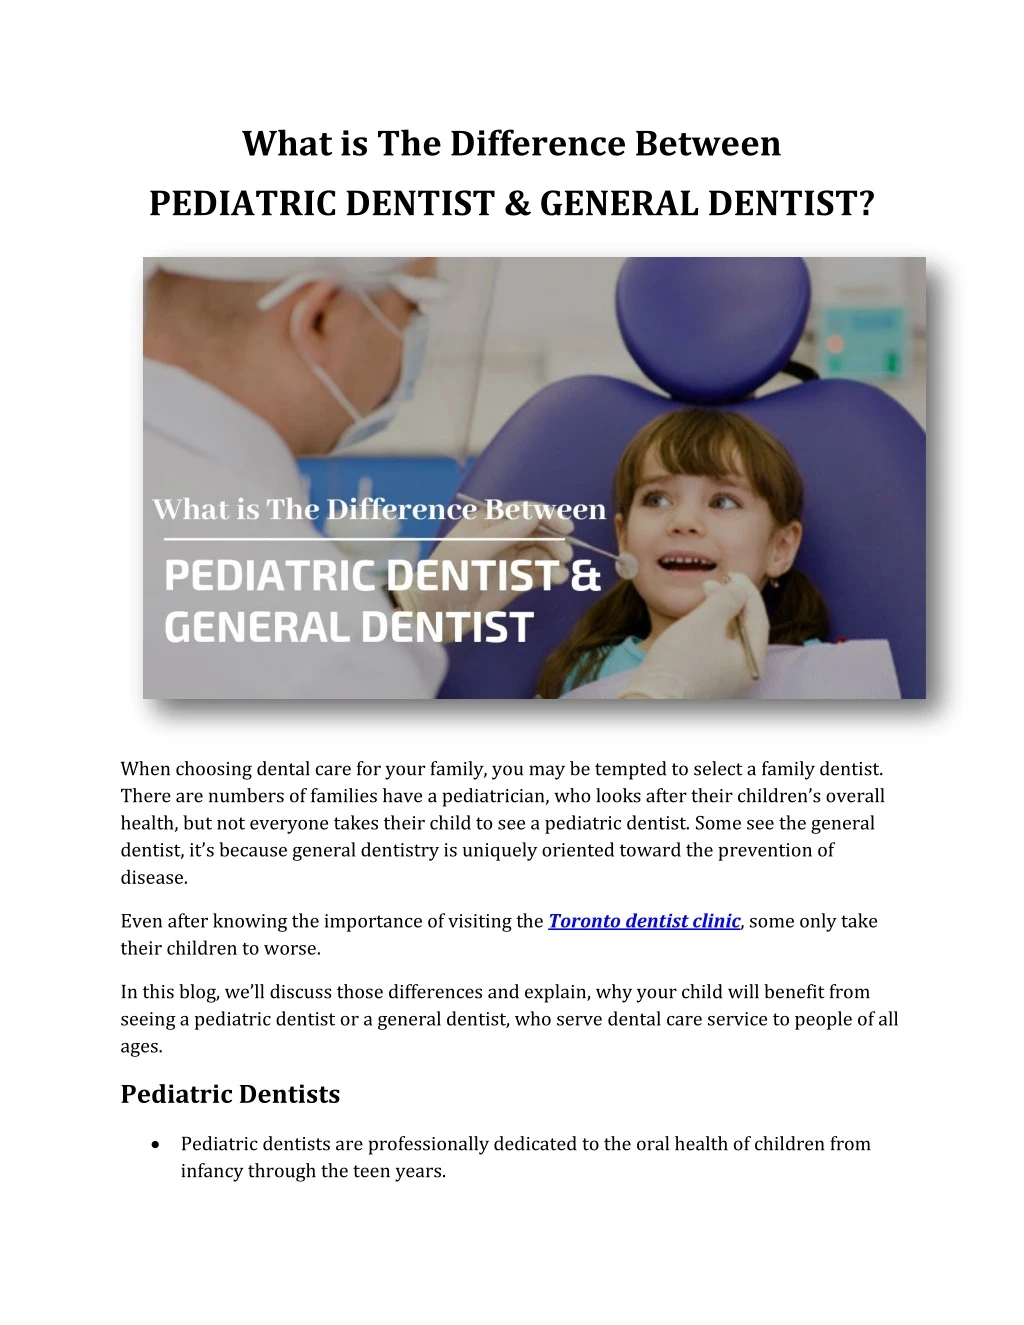 what is the difference between pediatric dentist